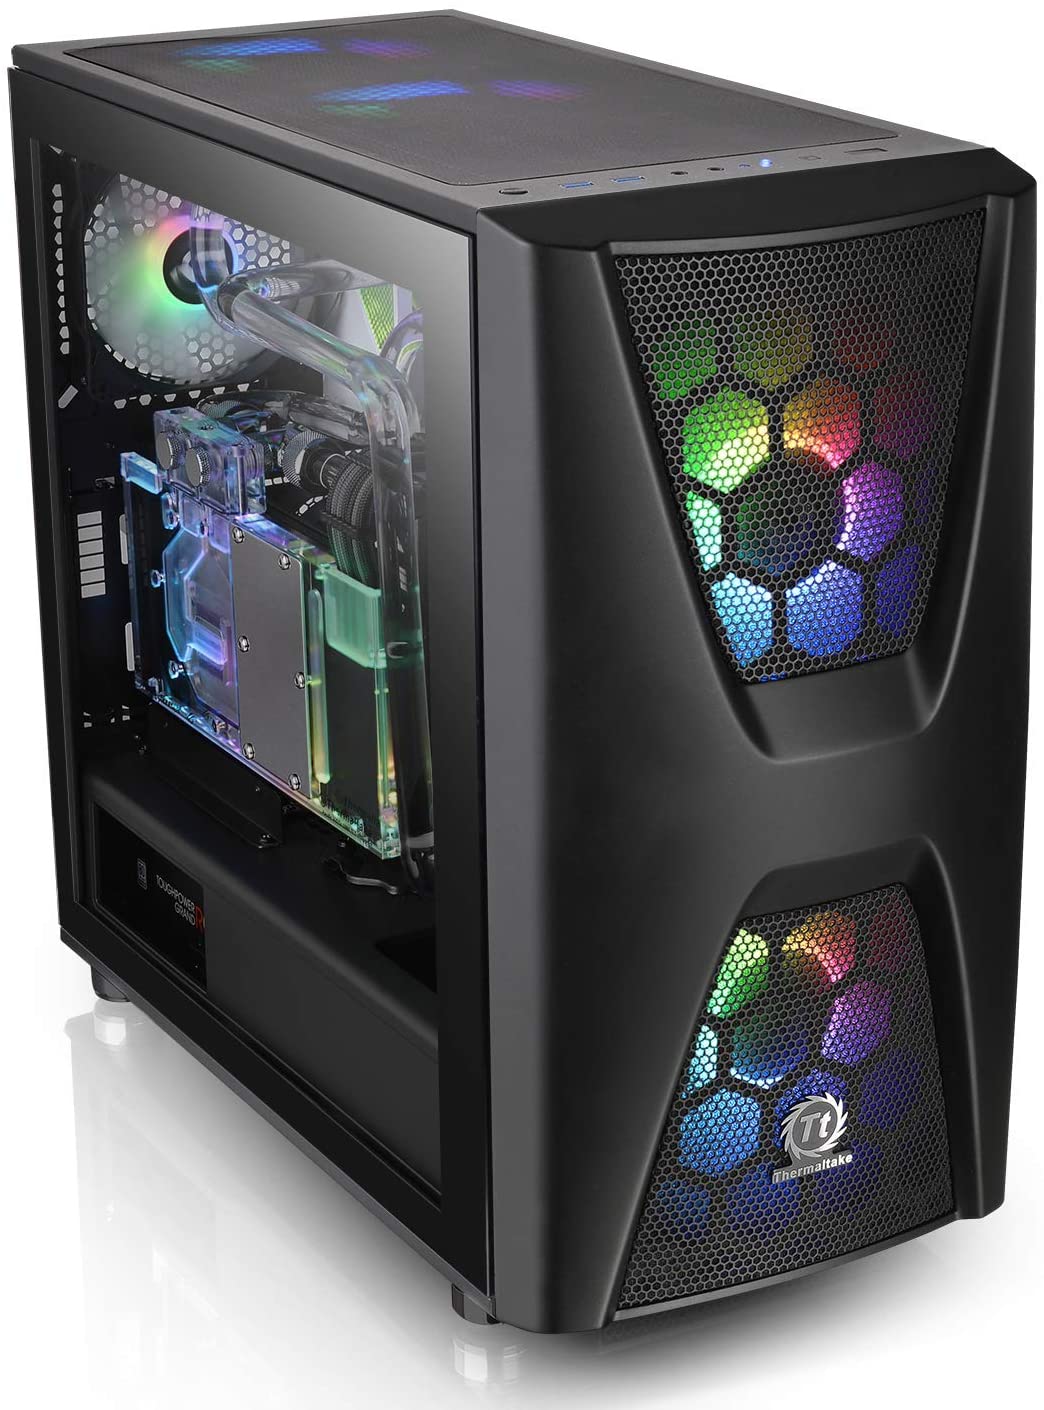 Thermaltake Commander C34 Motherboard Sync ARGB ATX Mid Tower Computer Chassis with 2 200mm ARGB 5V